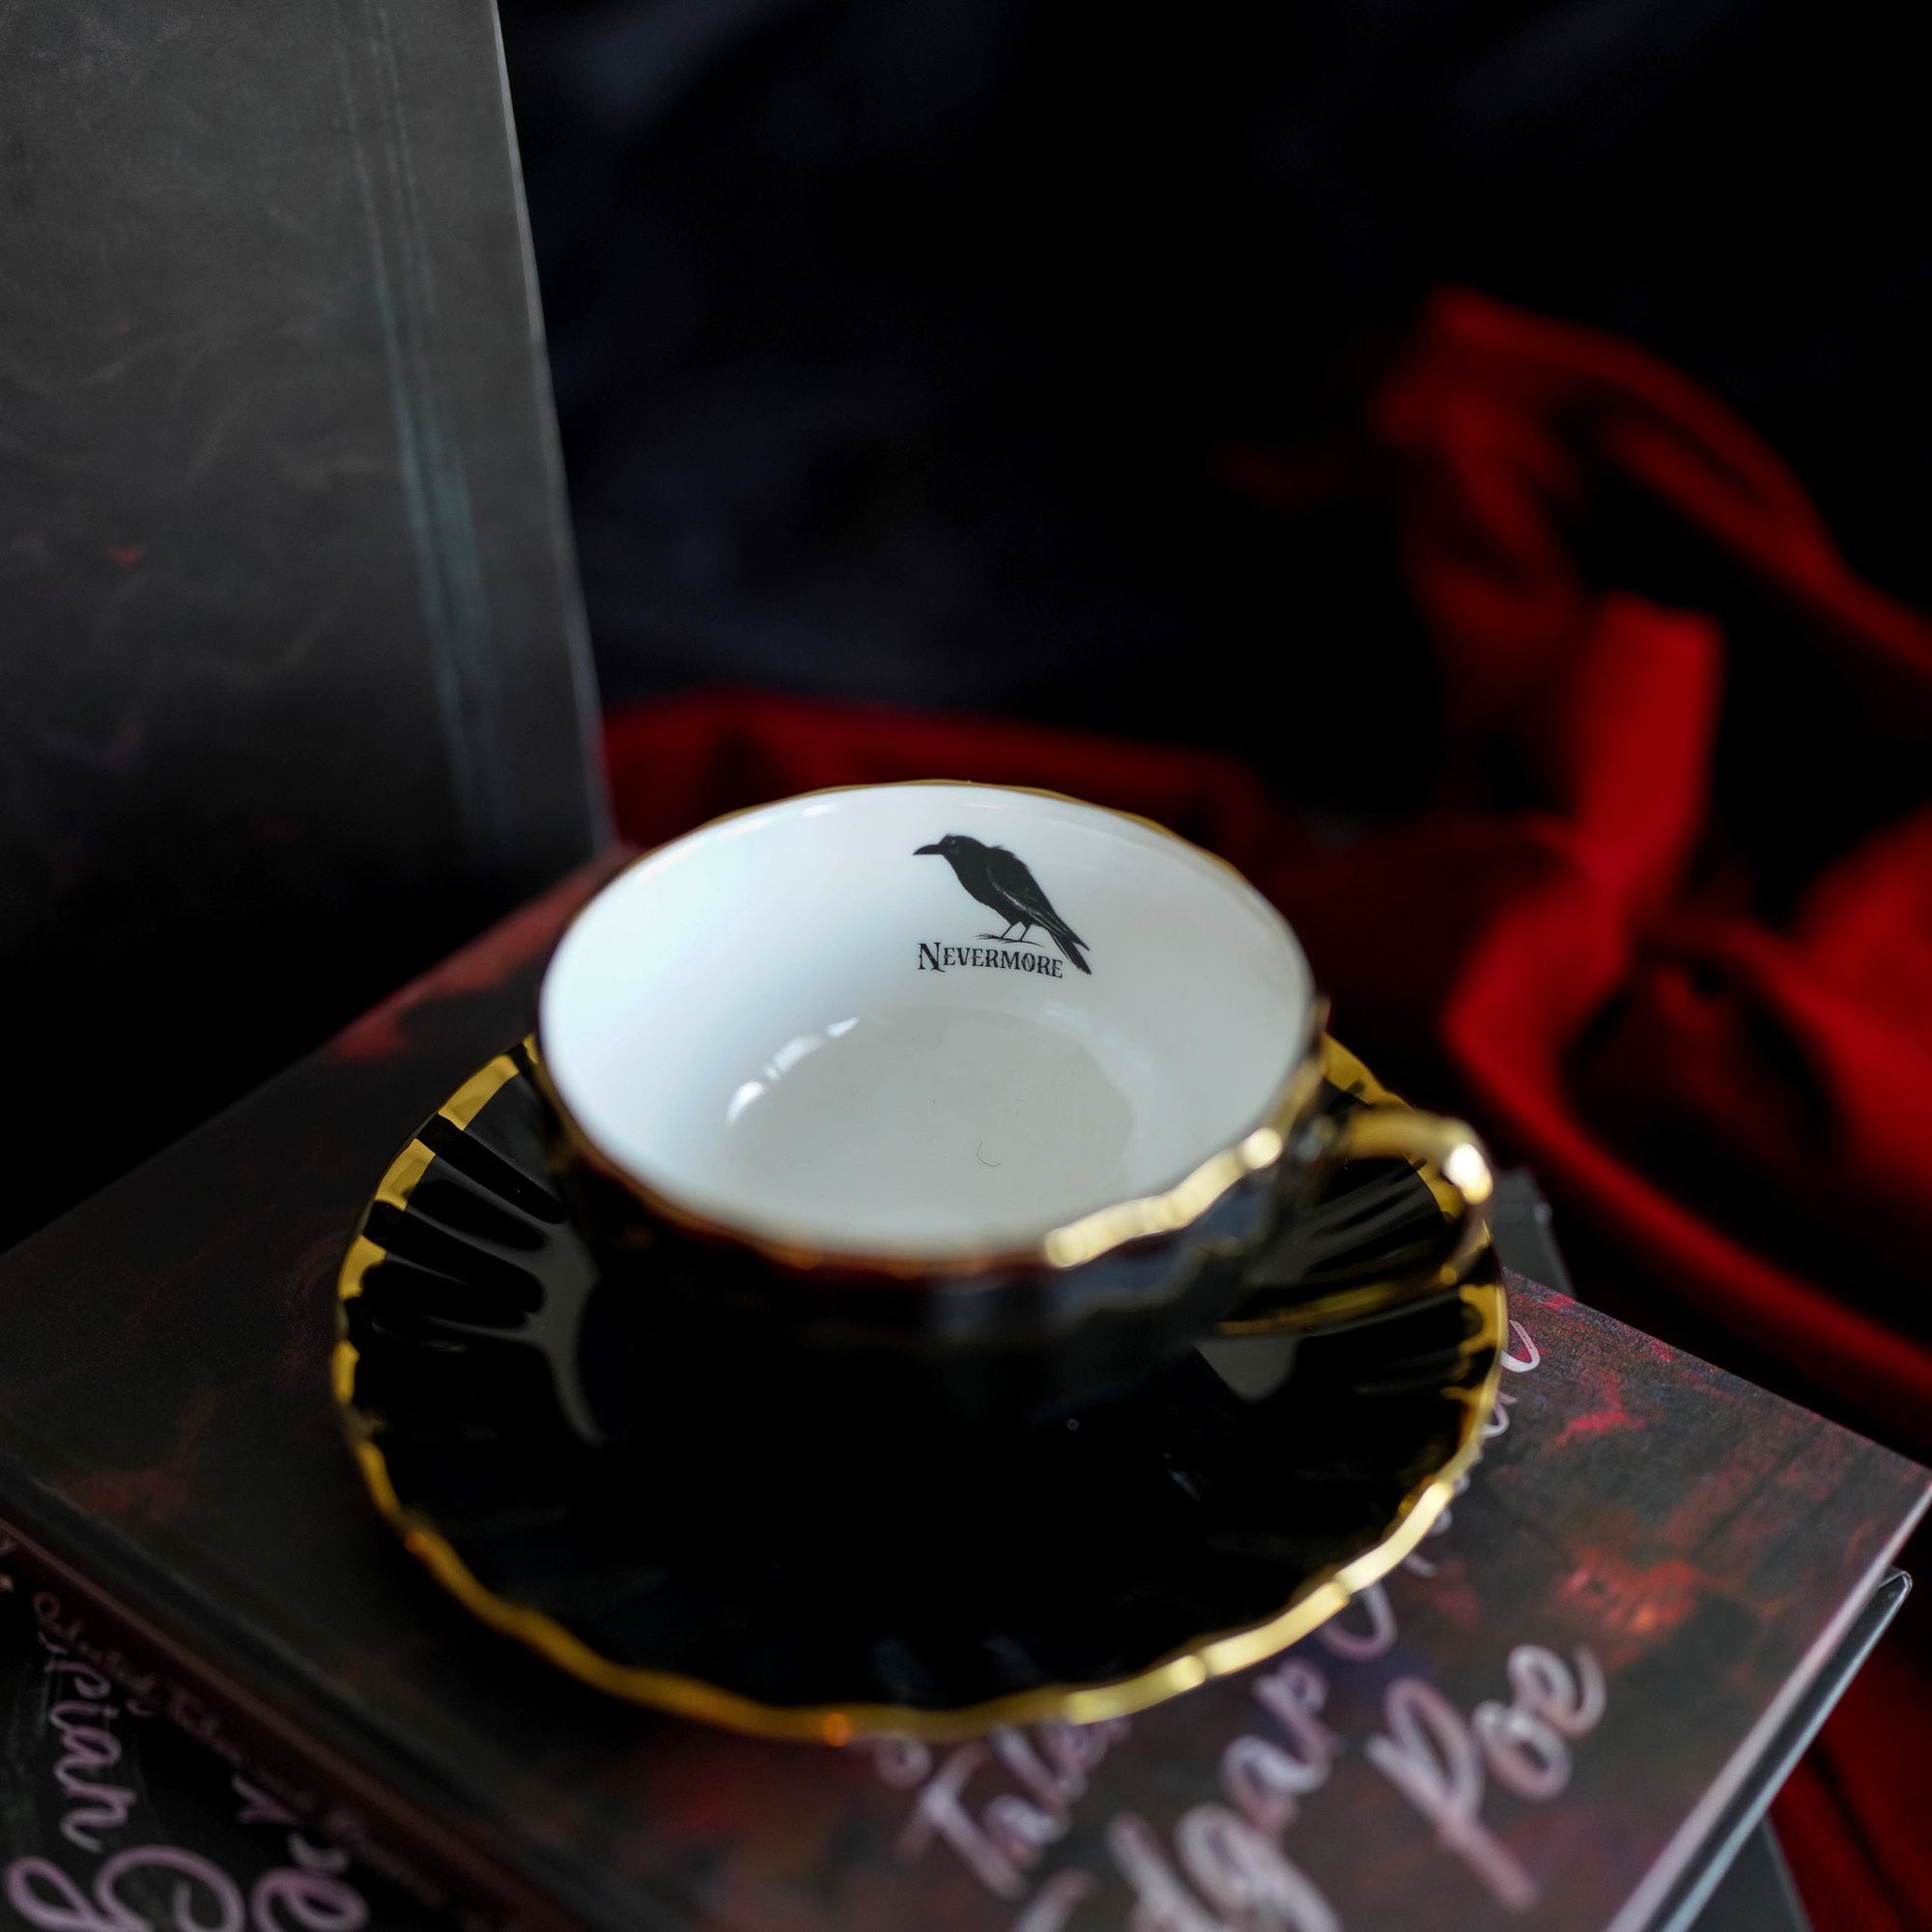 Nevermore Raven Teacup from LitJoy Crate | Collectibles & Gifts for Booklovers